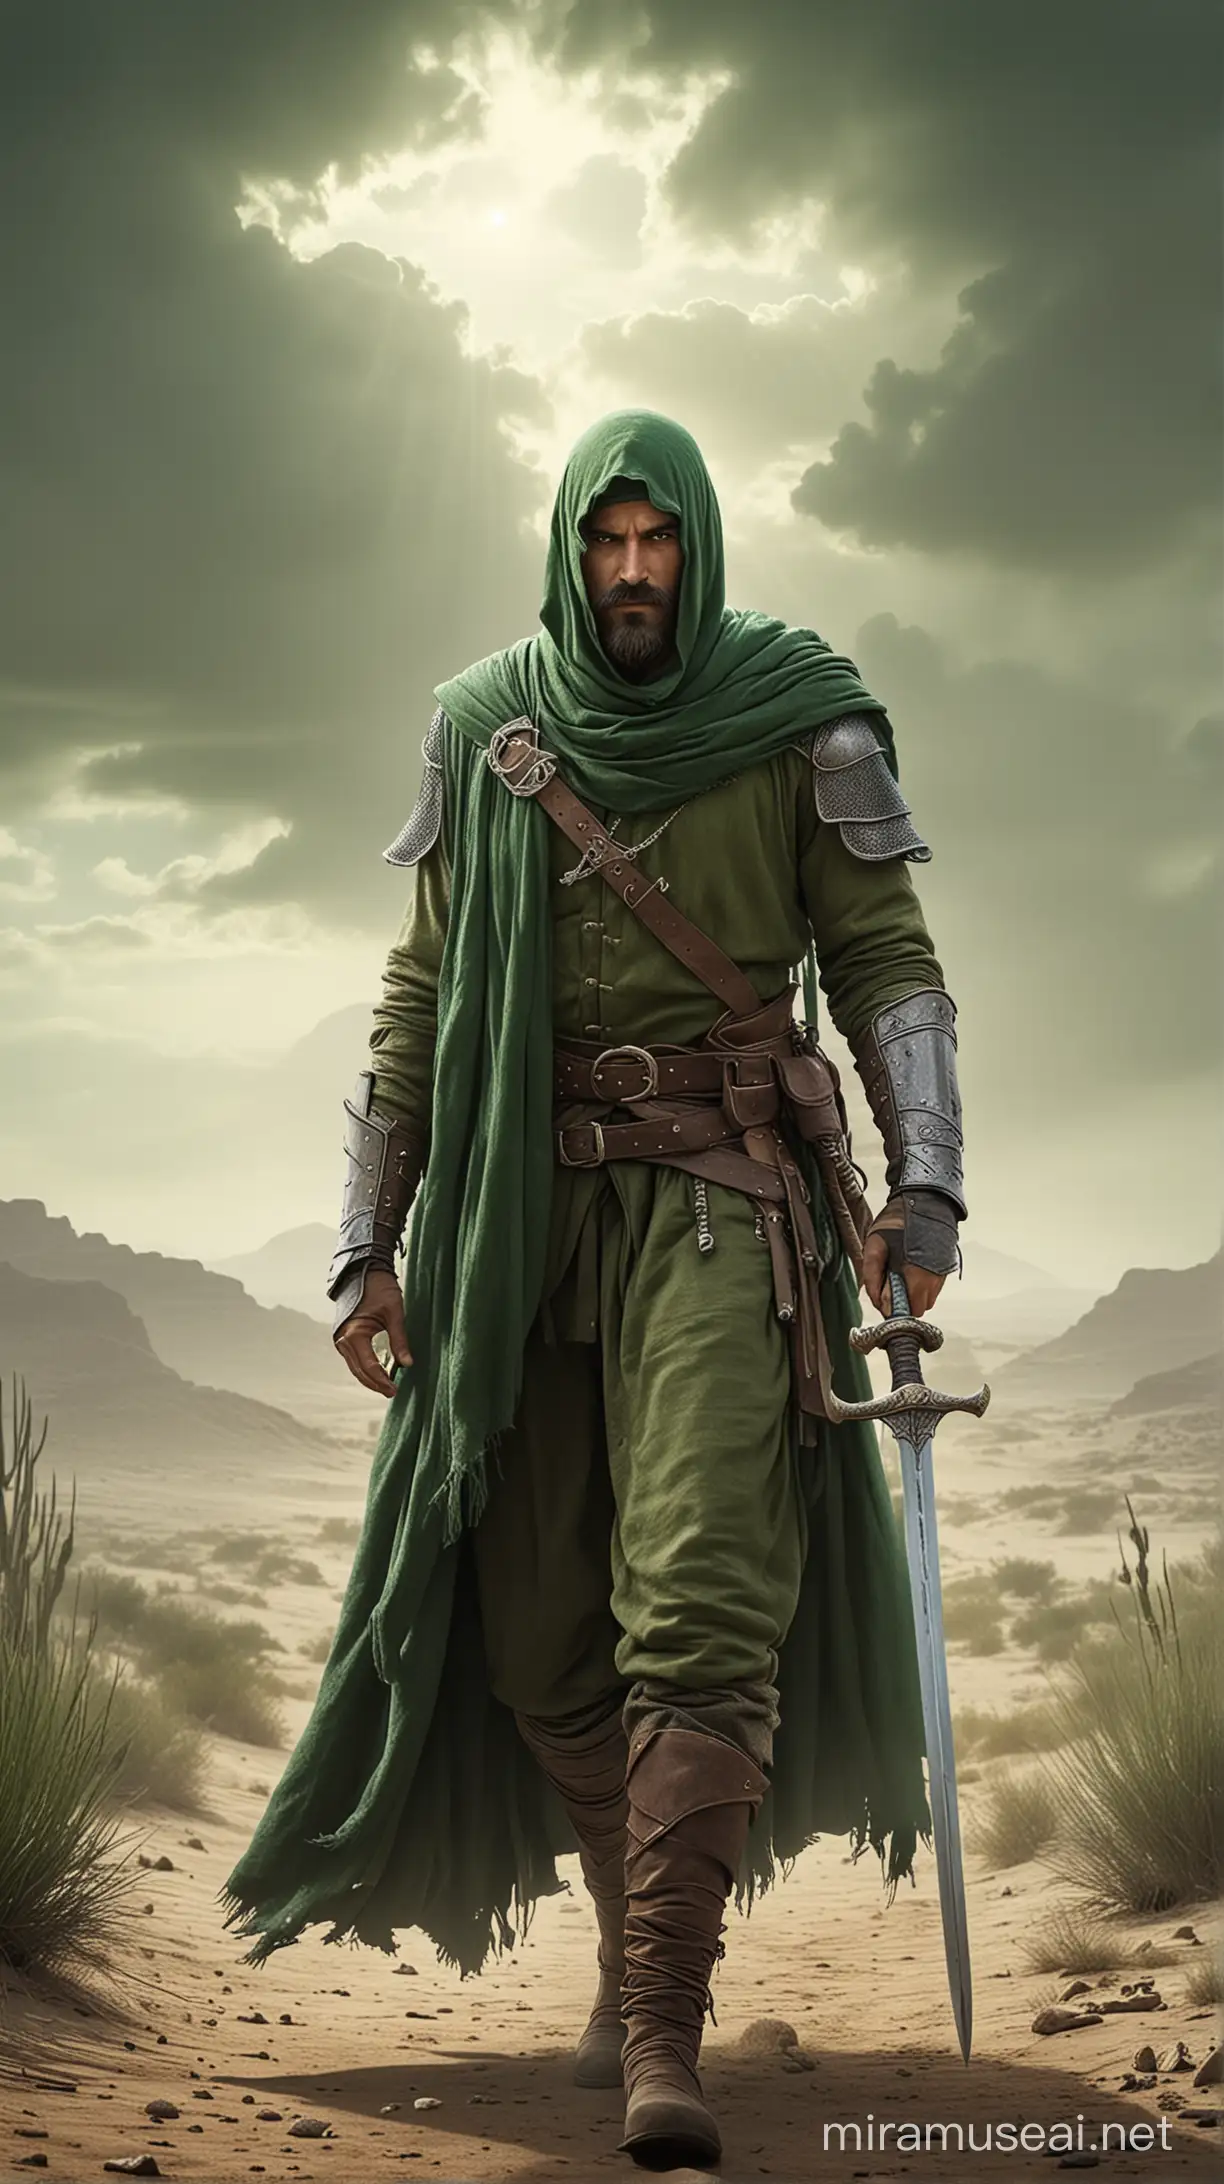 Serious Medieval Warrior with Two Swords in Desert Landscape